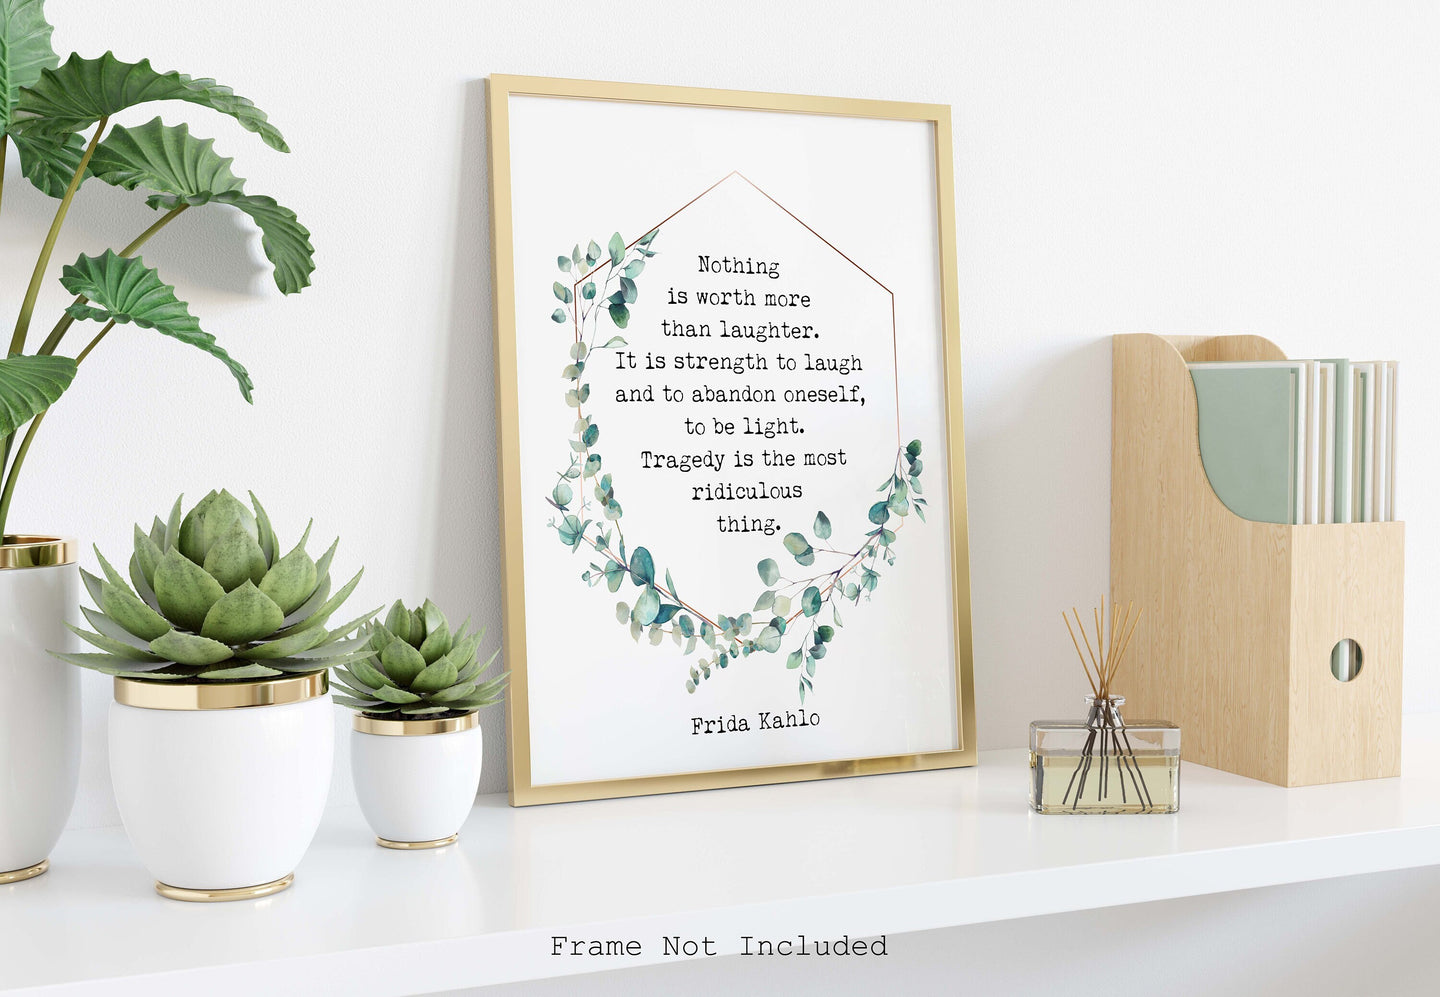 Frida Kahlo Print - Nothing is worth more than laughter - Frida Kahlo poster print - Artist Quote UNFRAMED